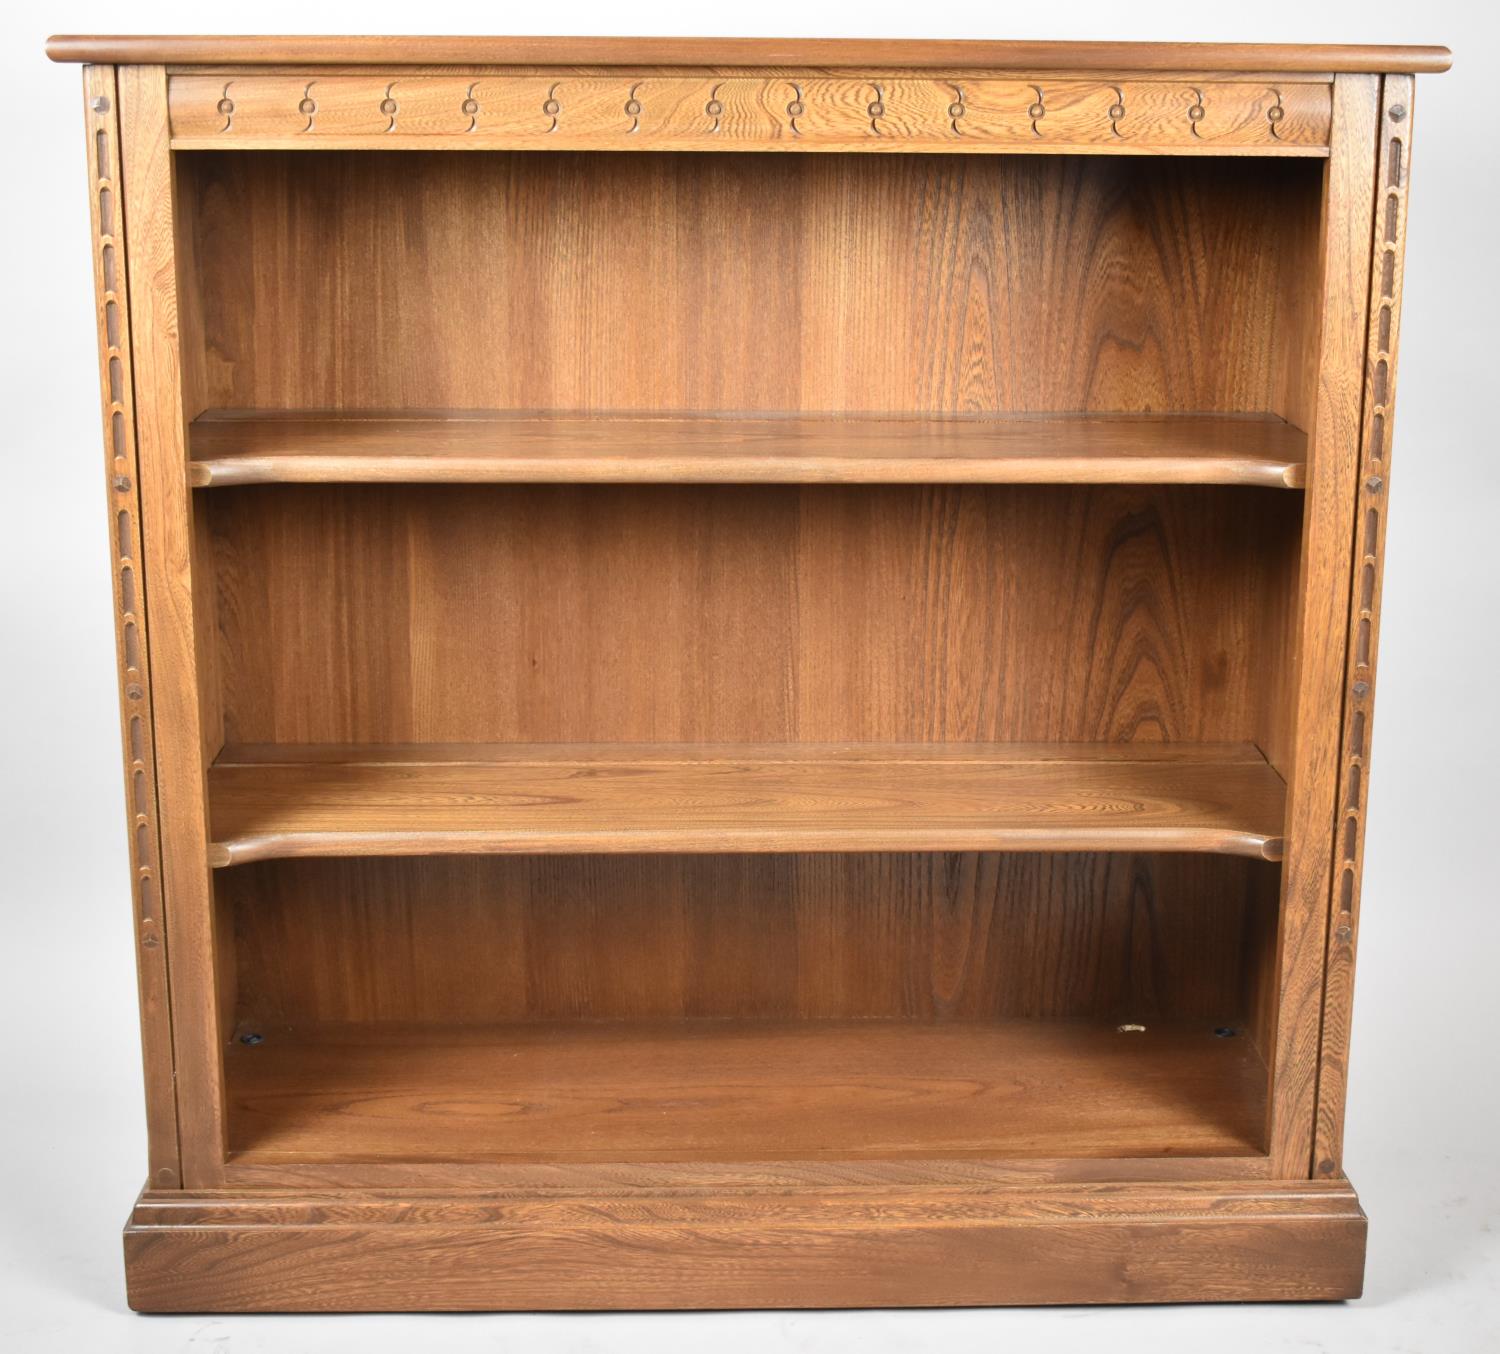 A Modern Ercol Two Shelf Open Bookcase, 96cms Wide - Image 2 of 3